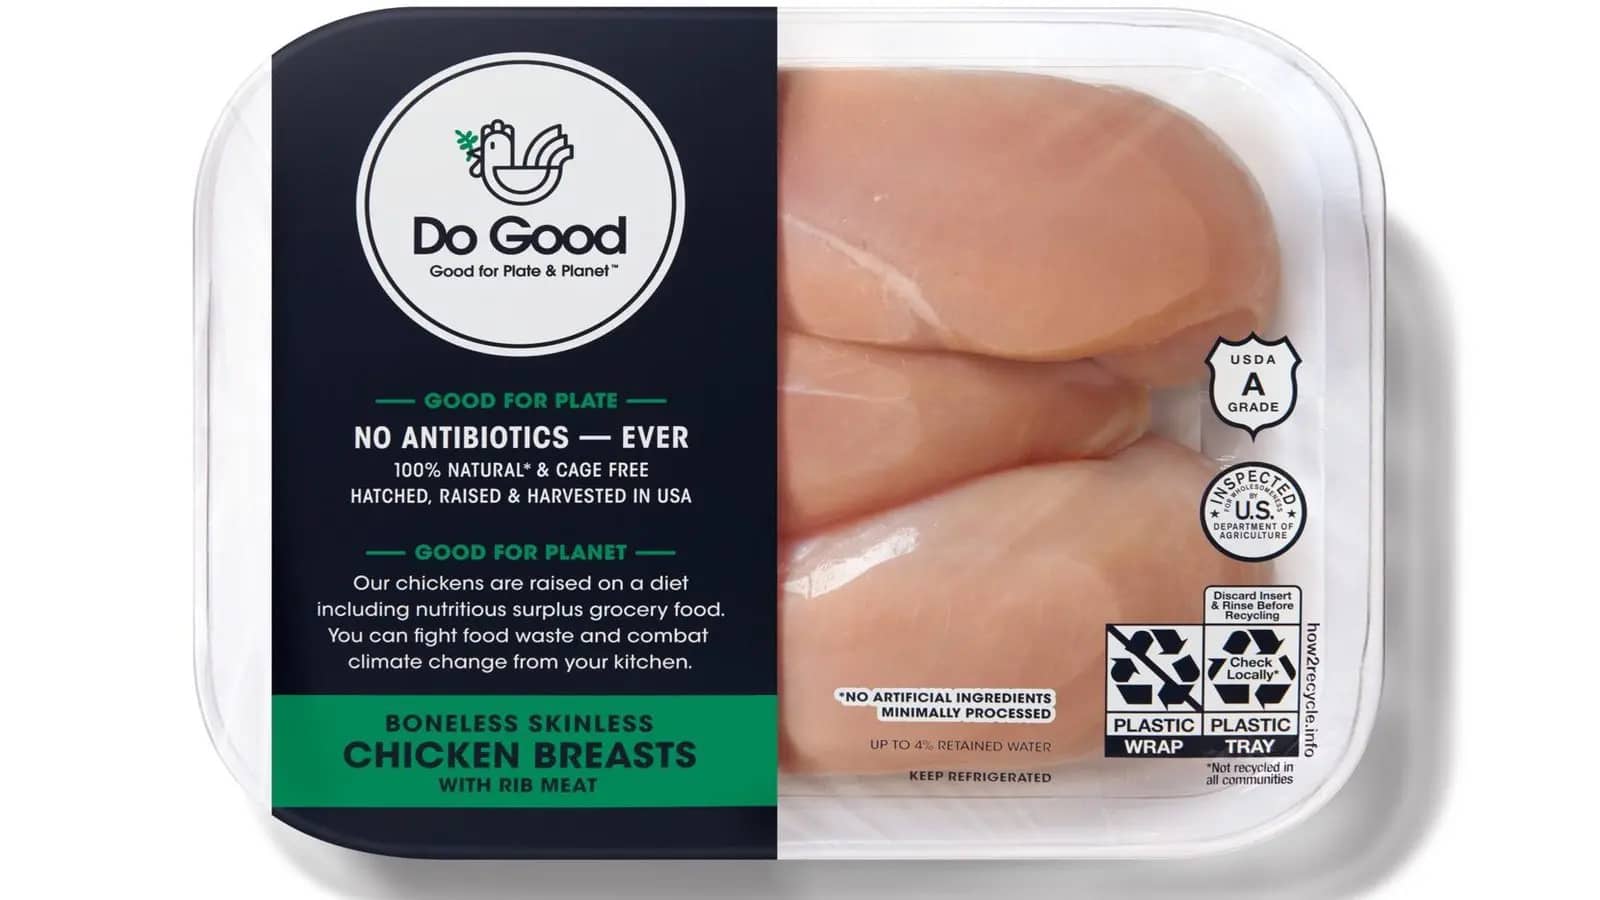 Do Good Foods announces plans to invest US$100 million in an animal-feed production facility Indiana